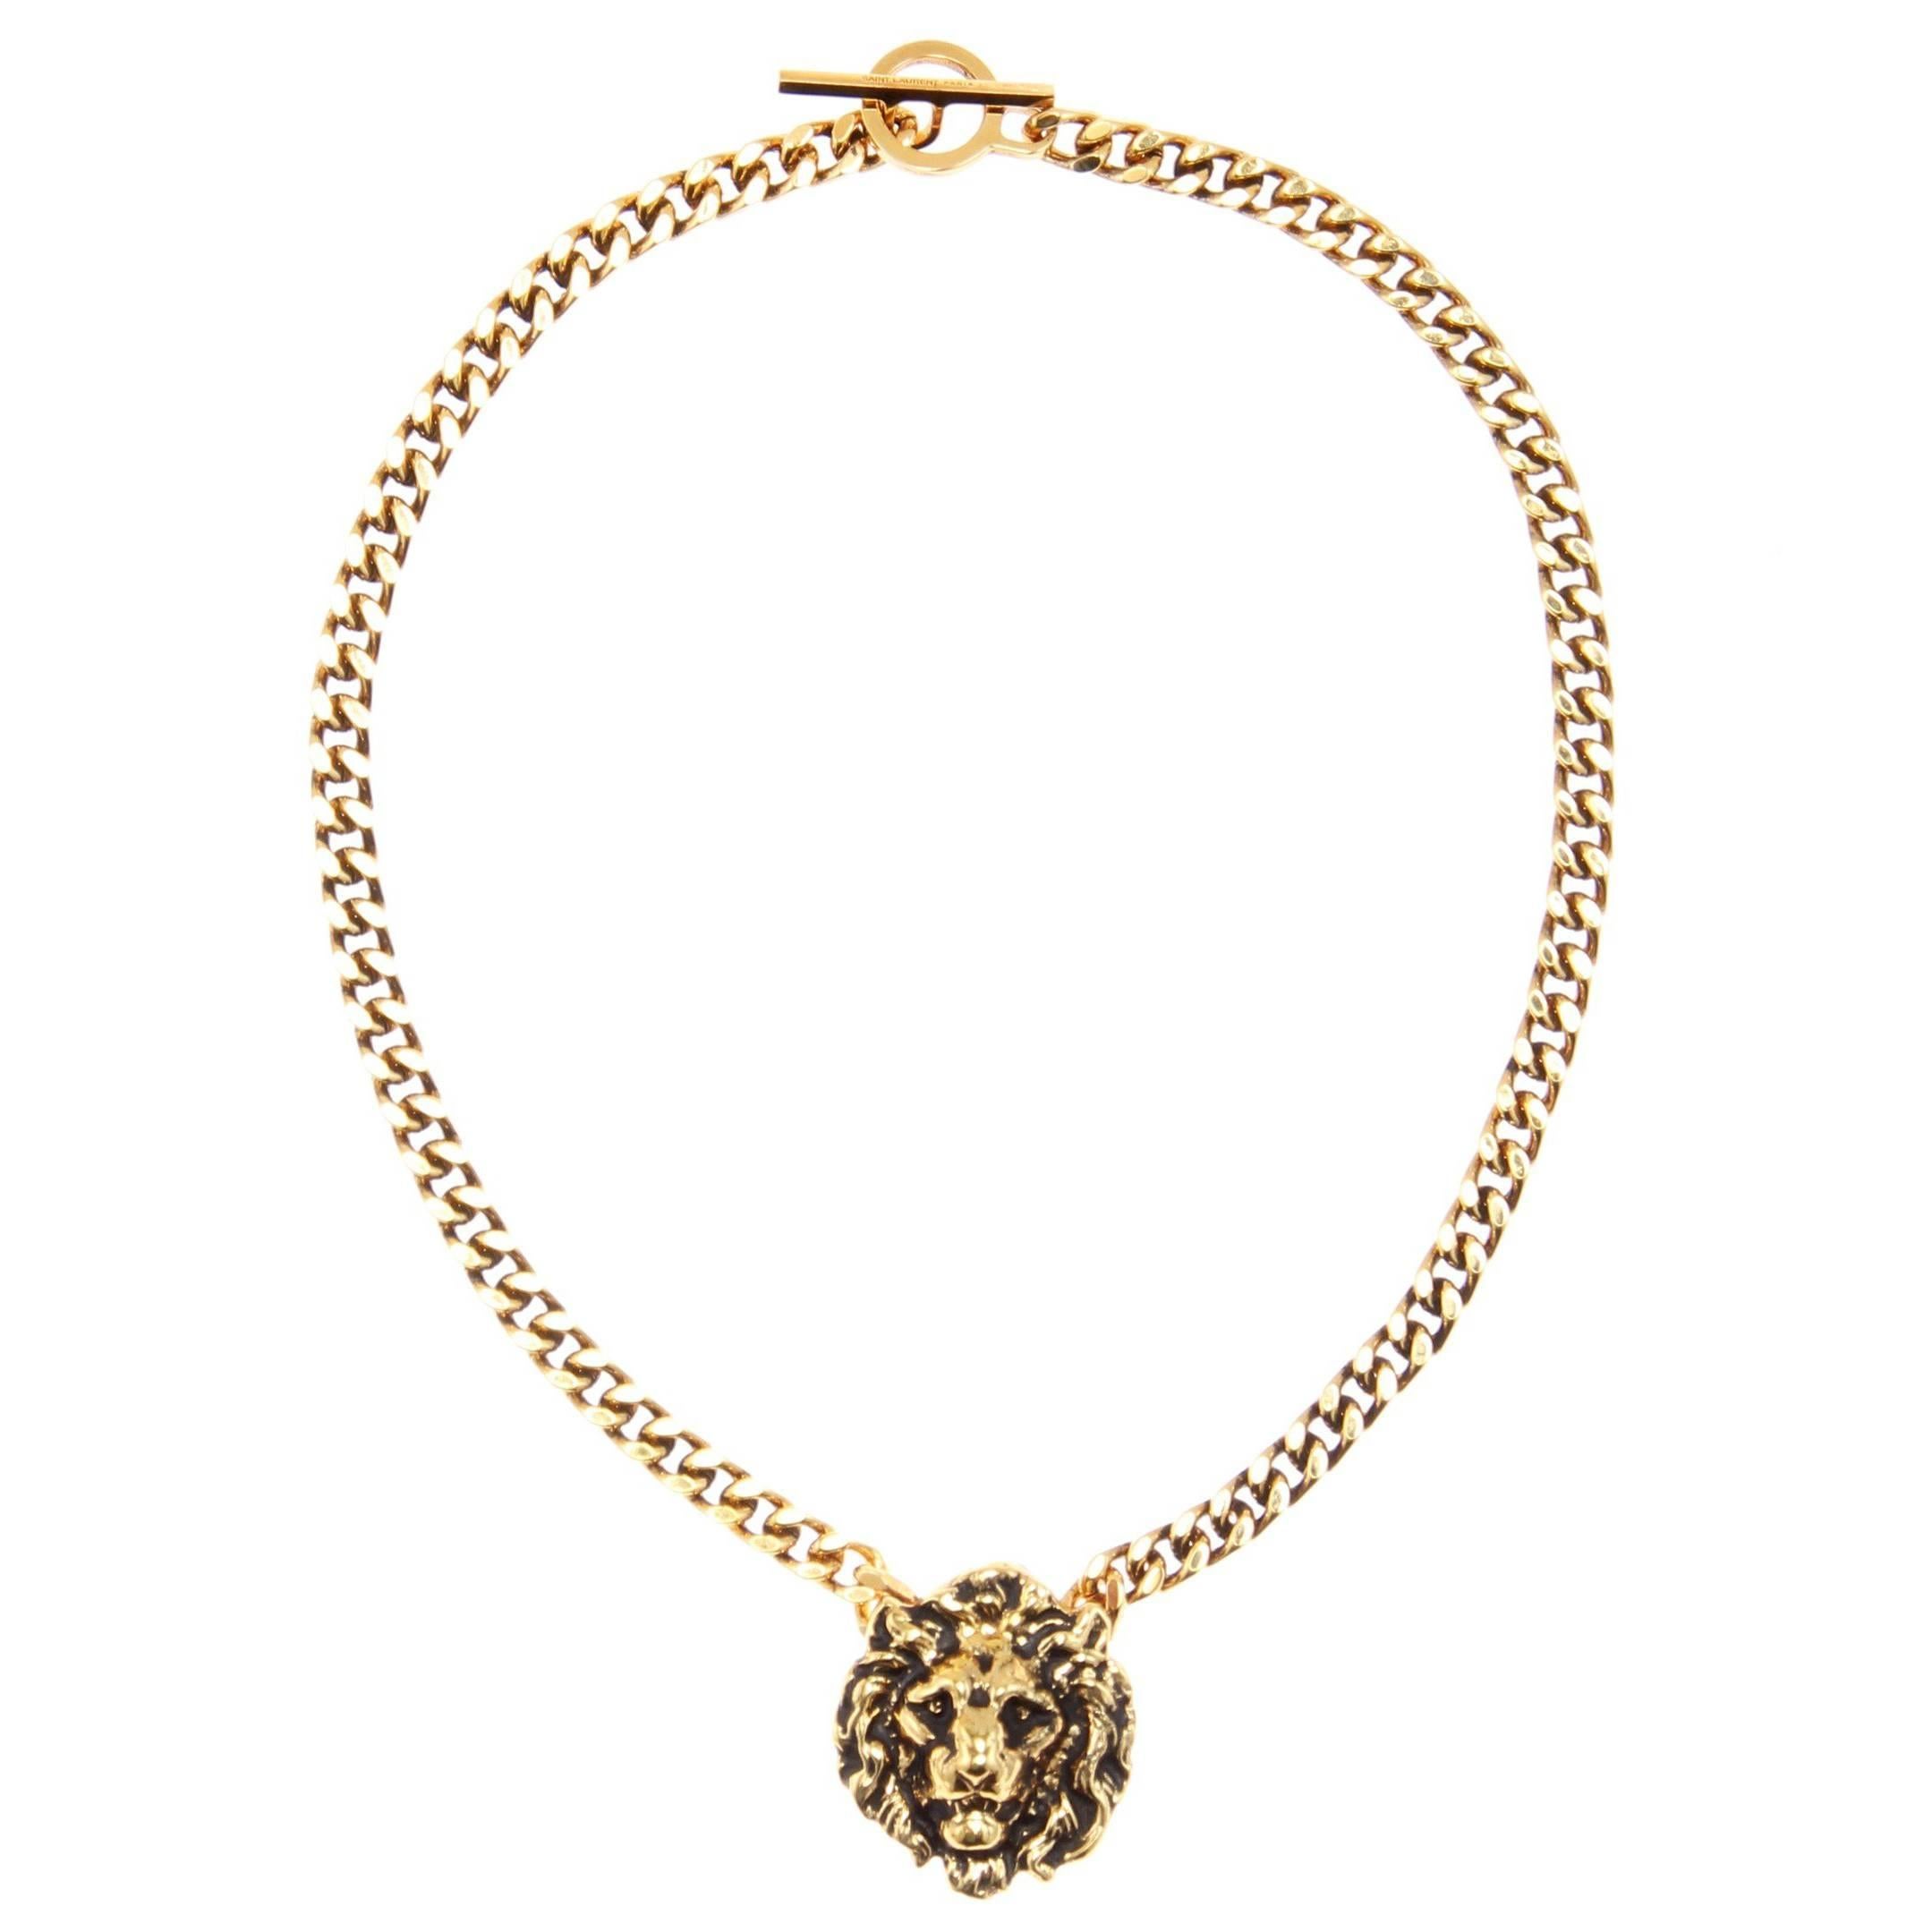 Saint Laurent NEW & SOLD OUT Gold Lion Head Charm Evening Choker Necklace in Box